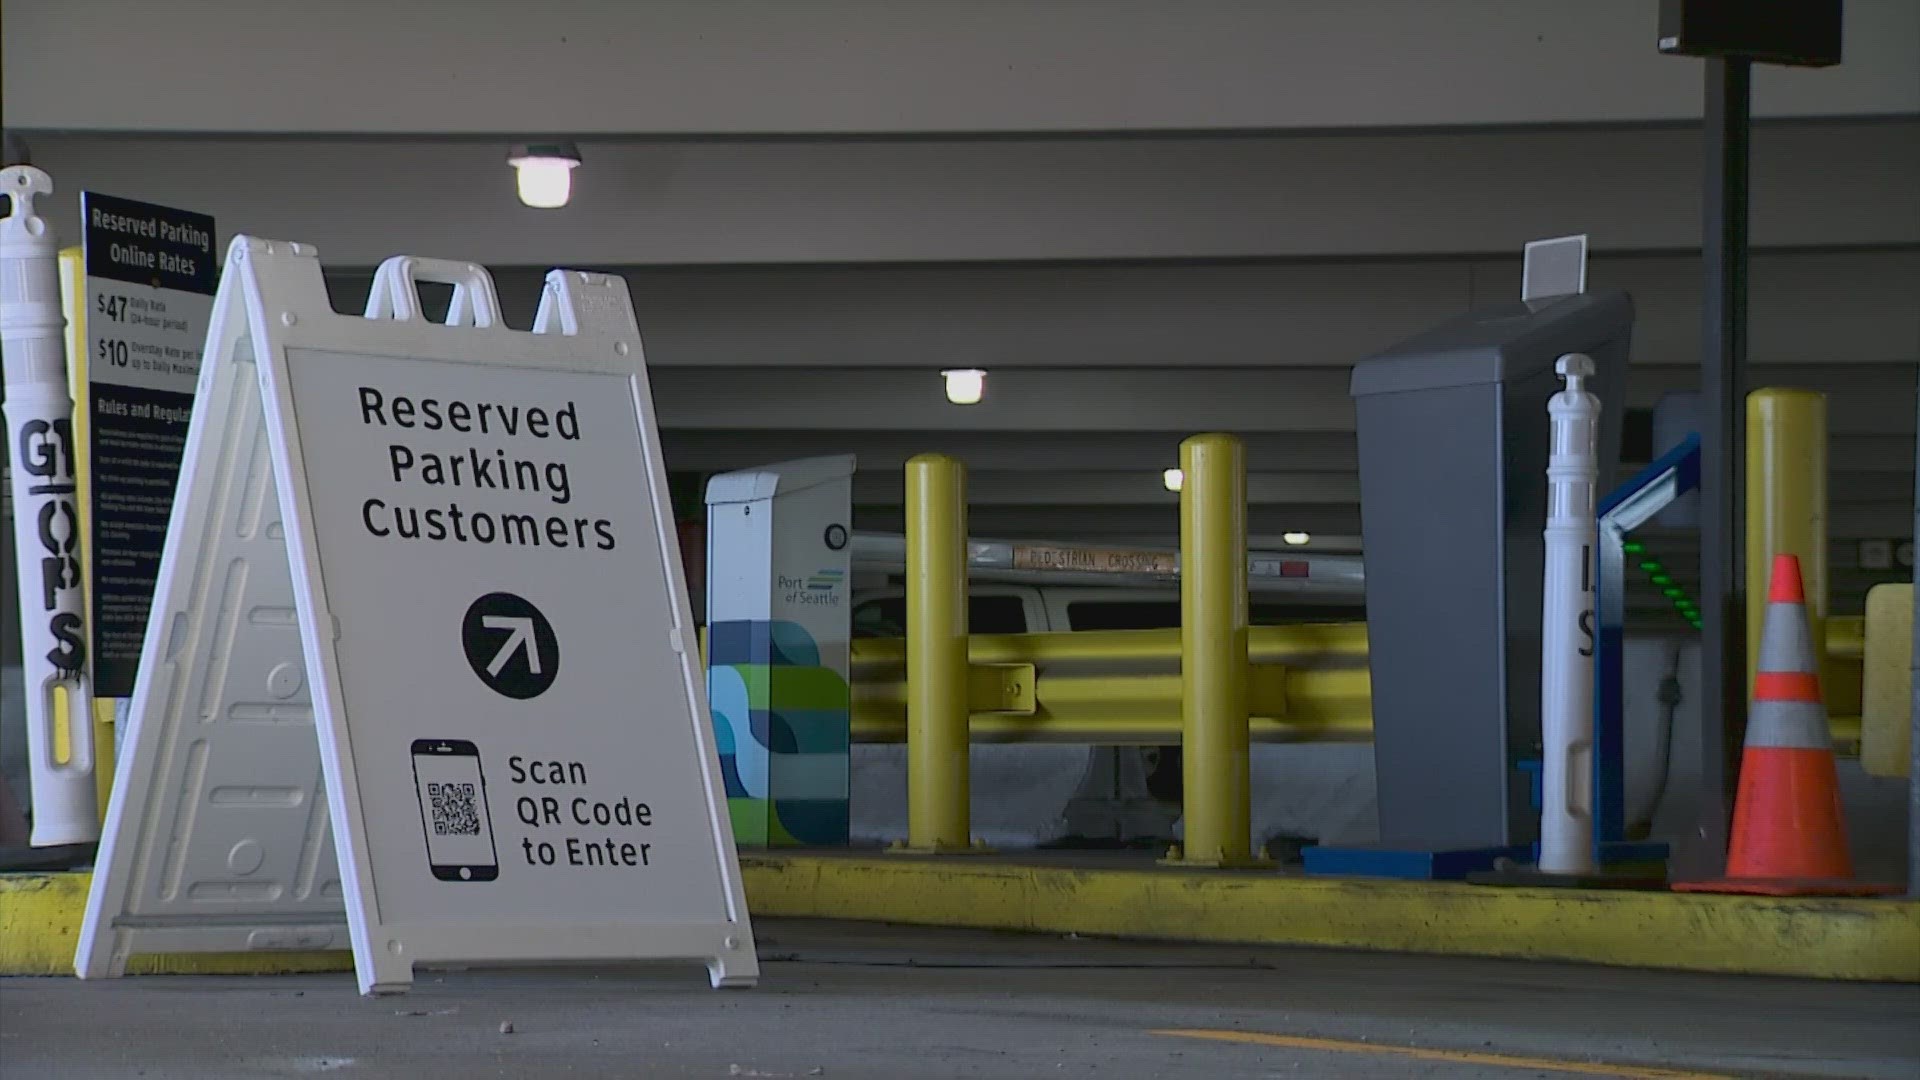 The new system will guarantee a parking spot and allow customers to make a reservation in the garage up to 120 days before arrival.